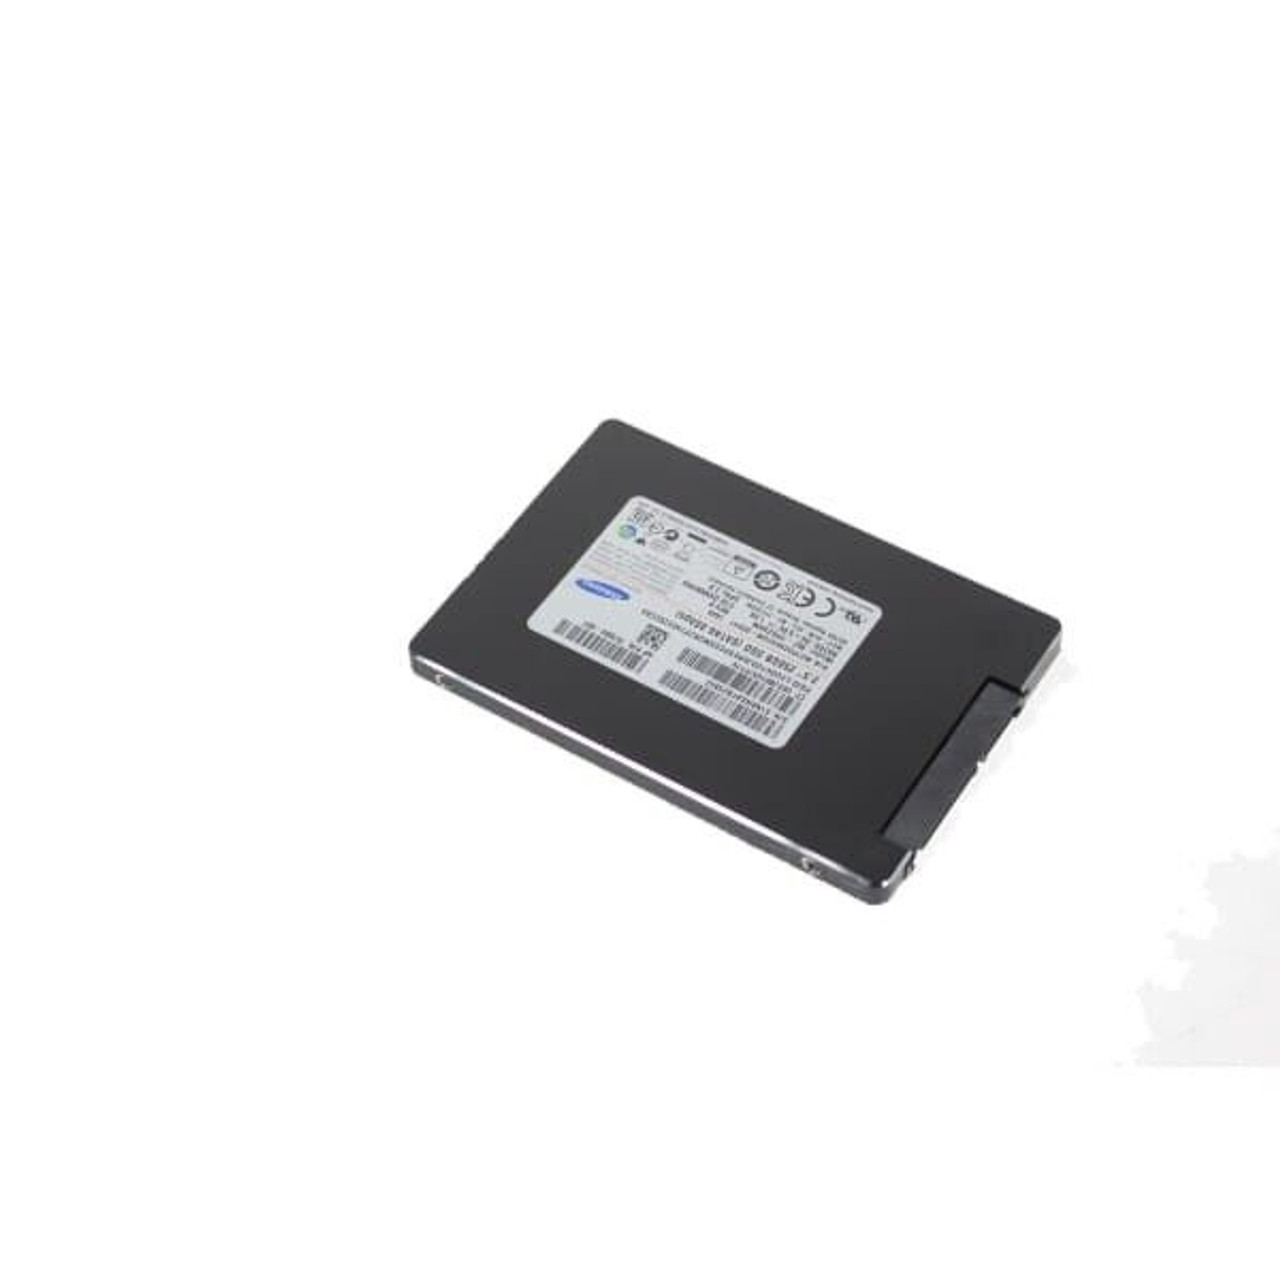 HP 761884-001 256GB 6G 2.5" SATA Solid State Drive zxy